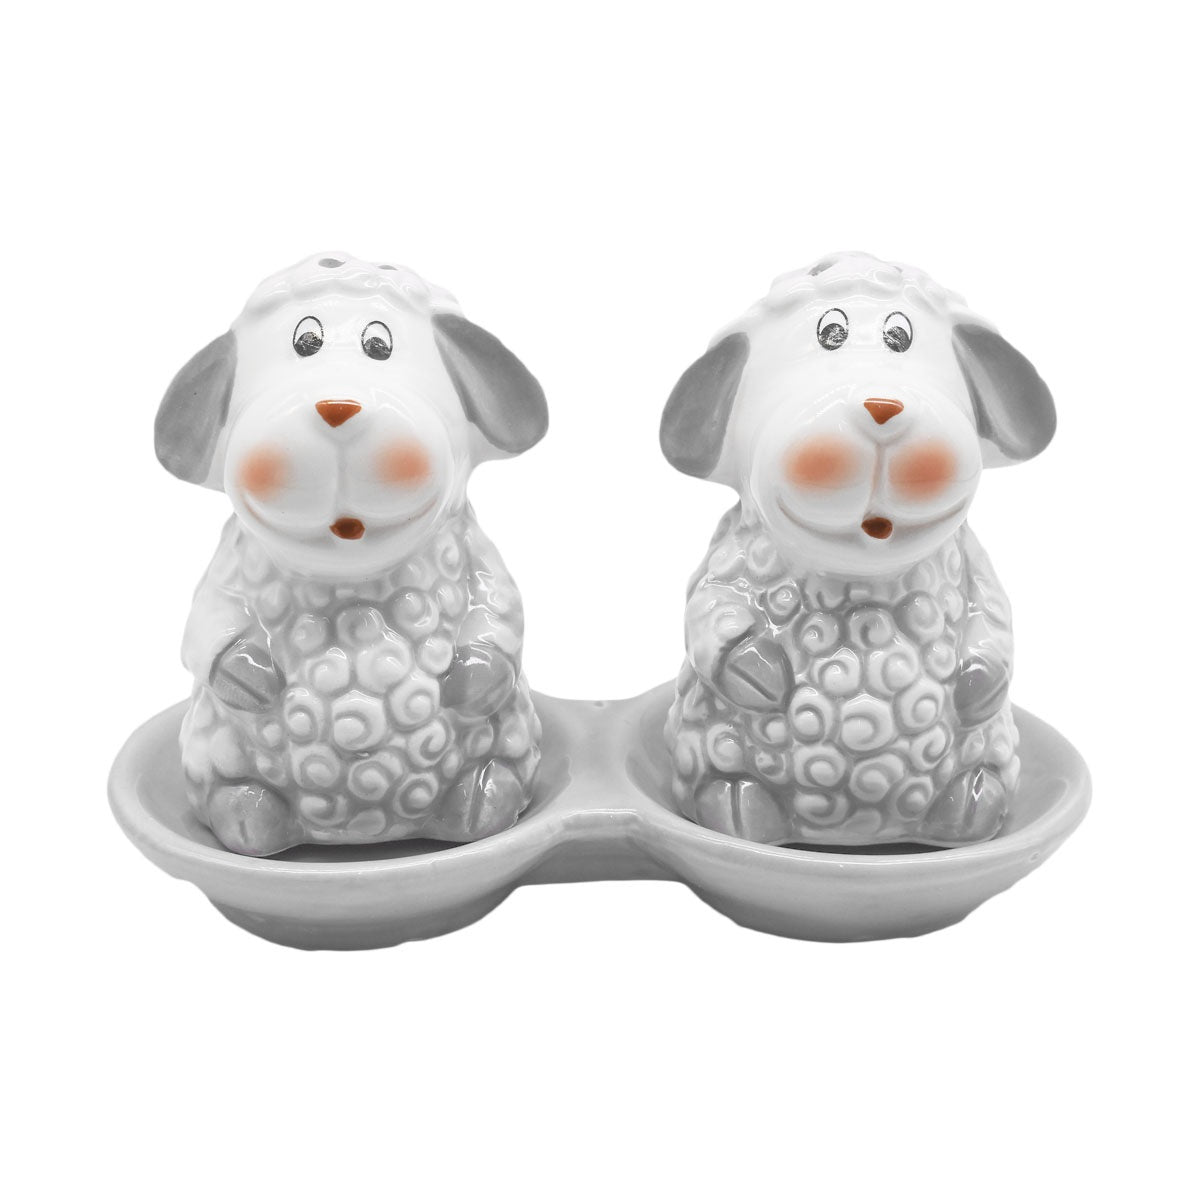 Ceramic Salt and Pepper Set with tray, Sheep Design, Pink (8561)